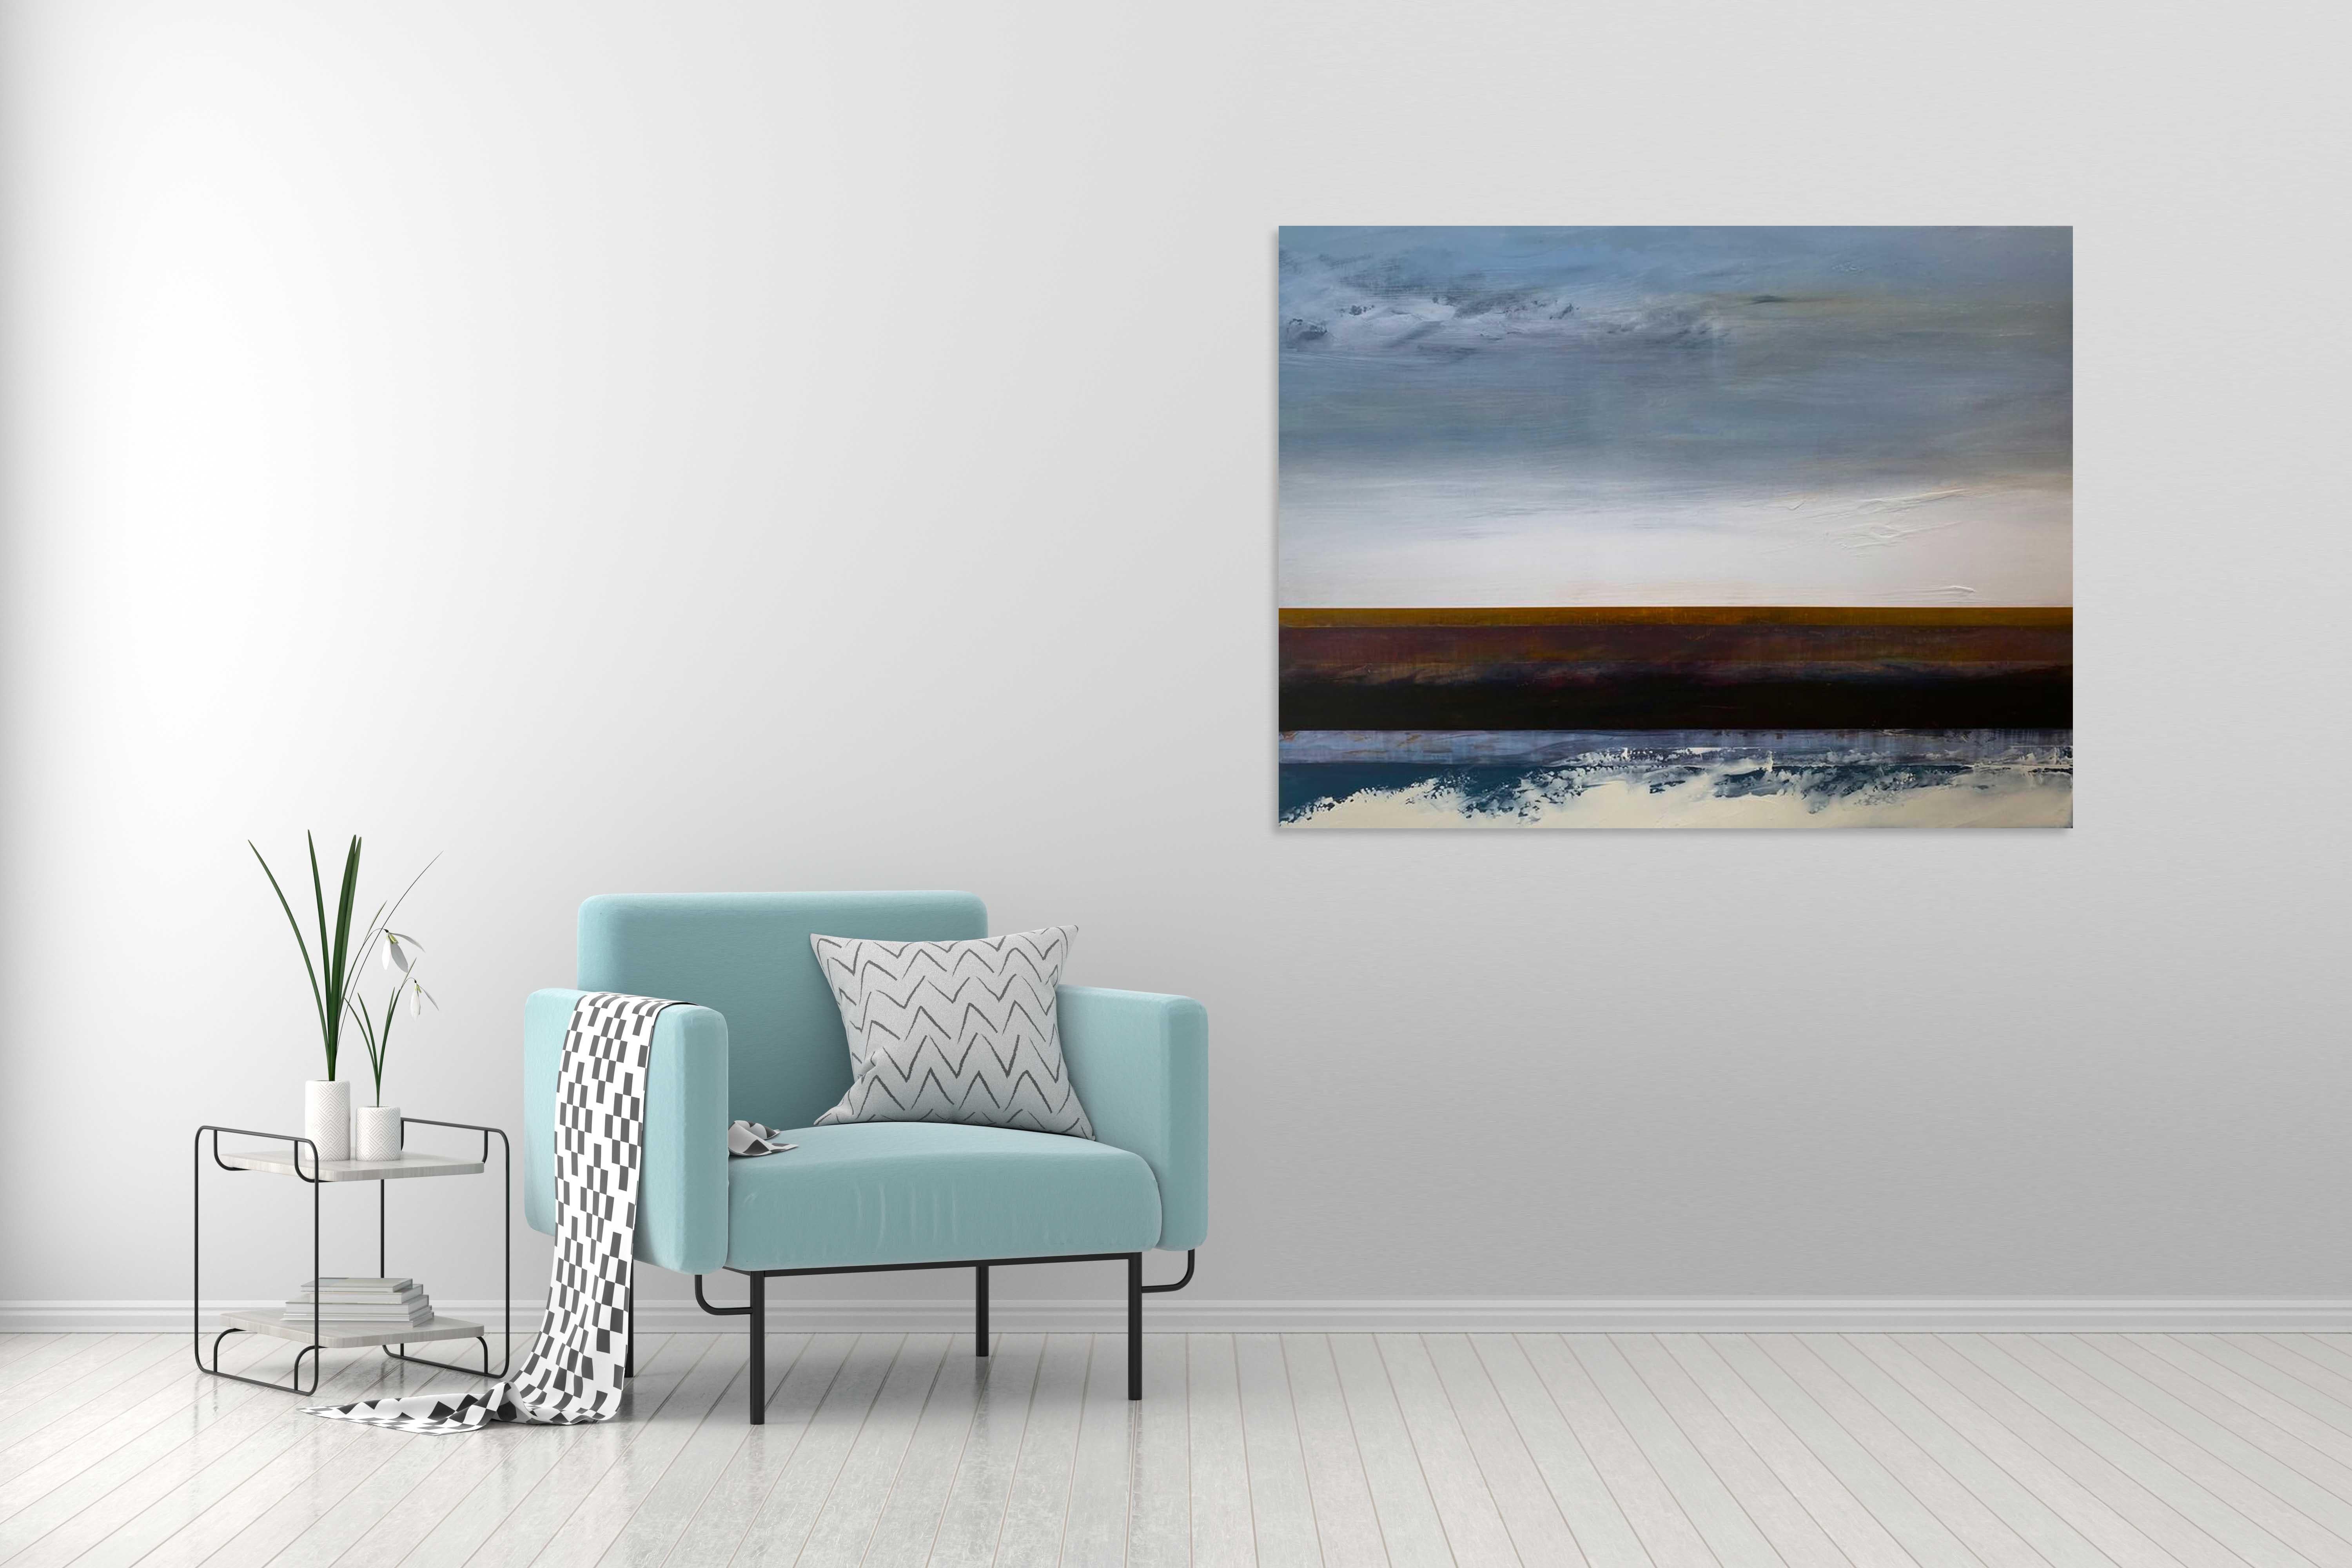  Seascape Ocean Contemporary  Seascape  Mixed Media  Original Painting - Gray Landscape Painting by Katheryn Holt